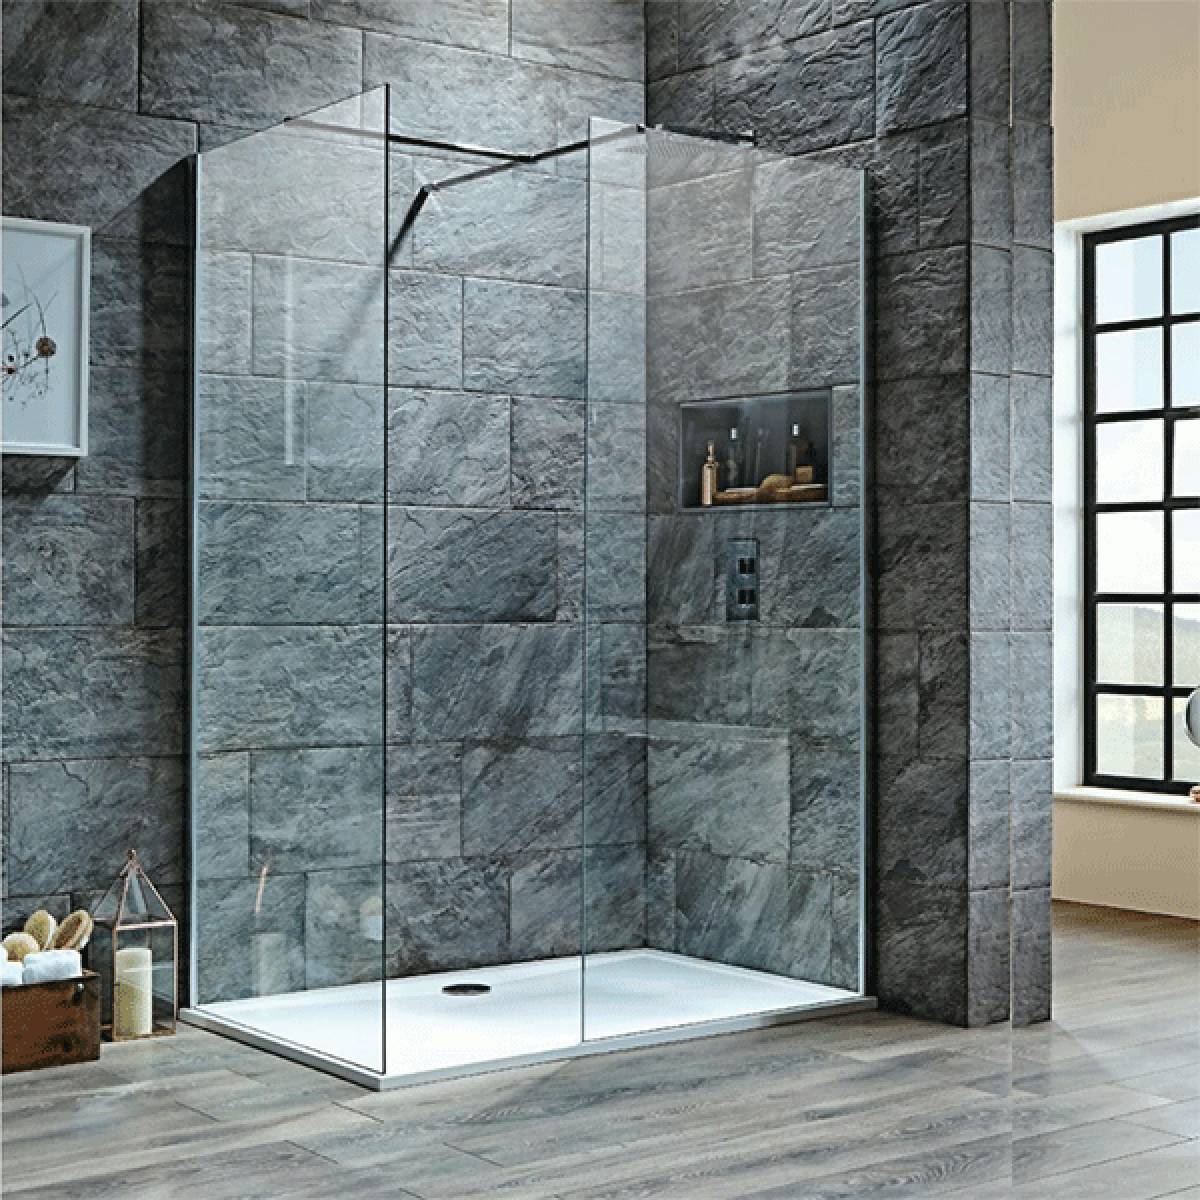 Kiimat Complete 900mm Walk In Shower Bundle with Chrome Shower